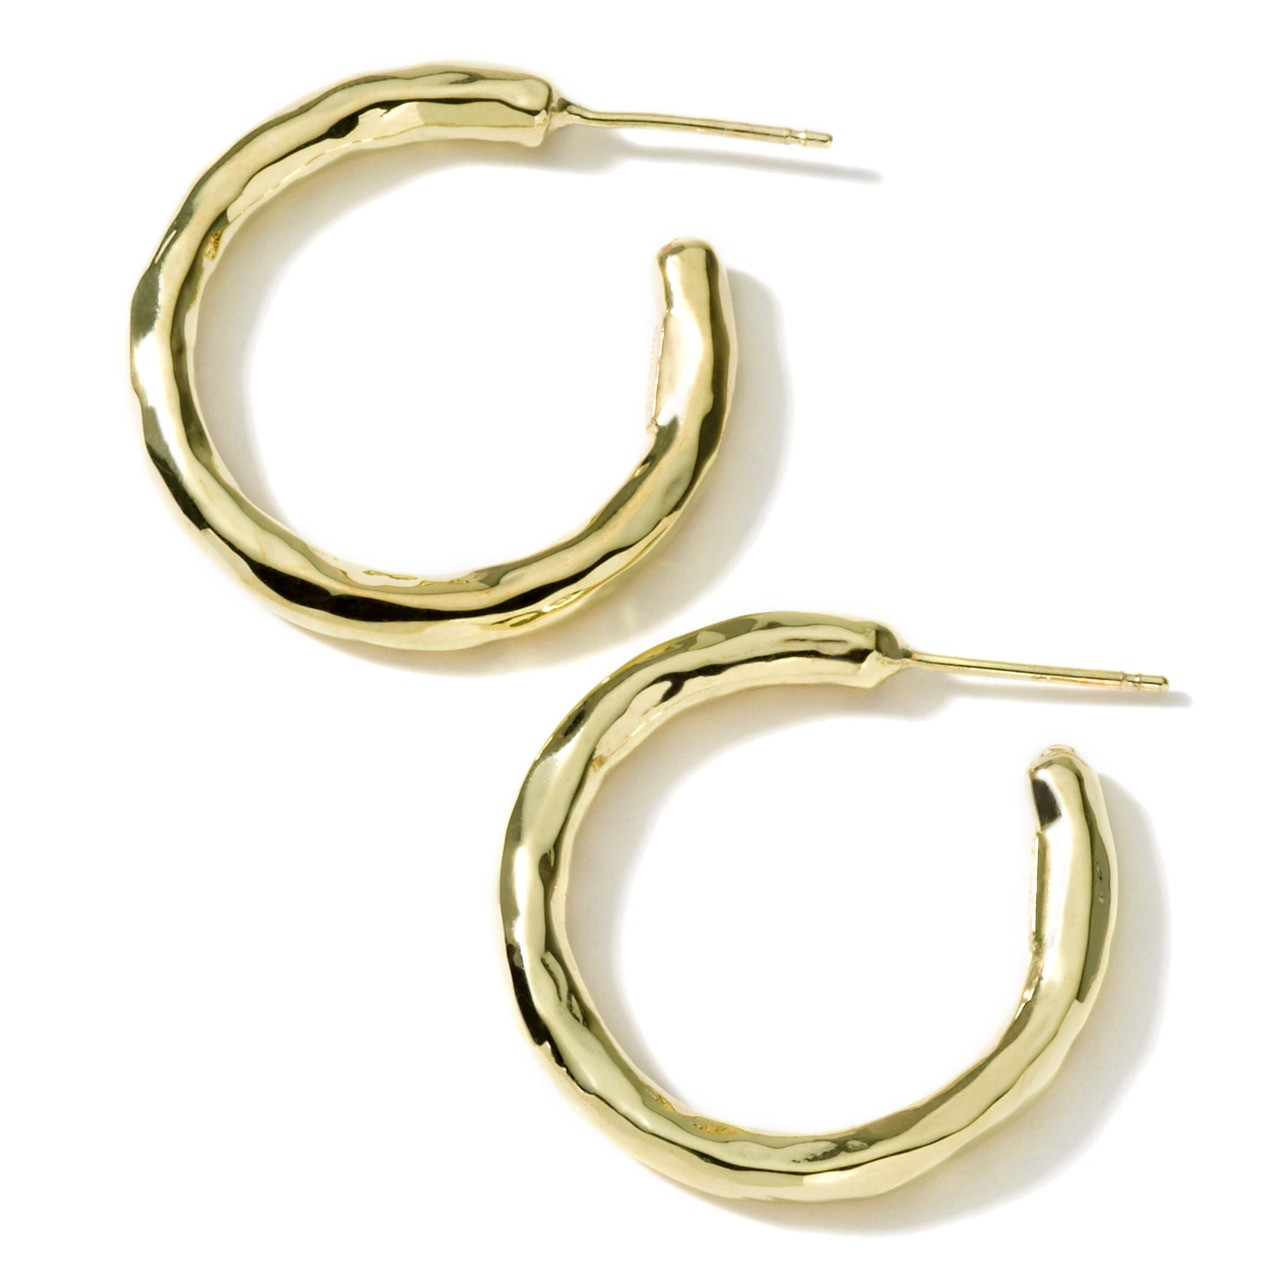 Ippolita Classico Thick Hammered Round Hoop Earrings in Sterling Silver